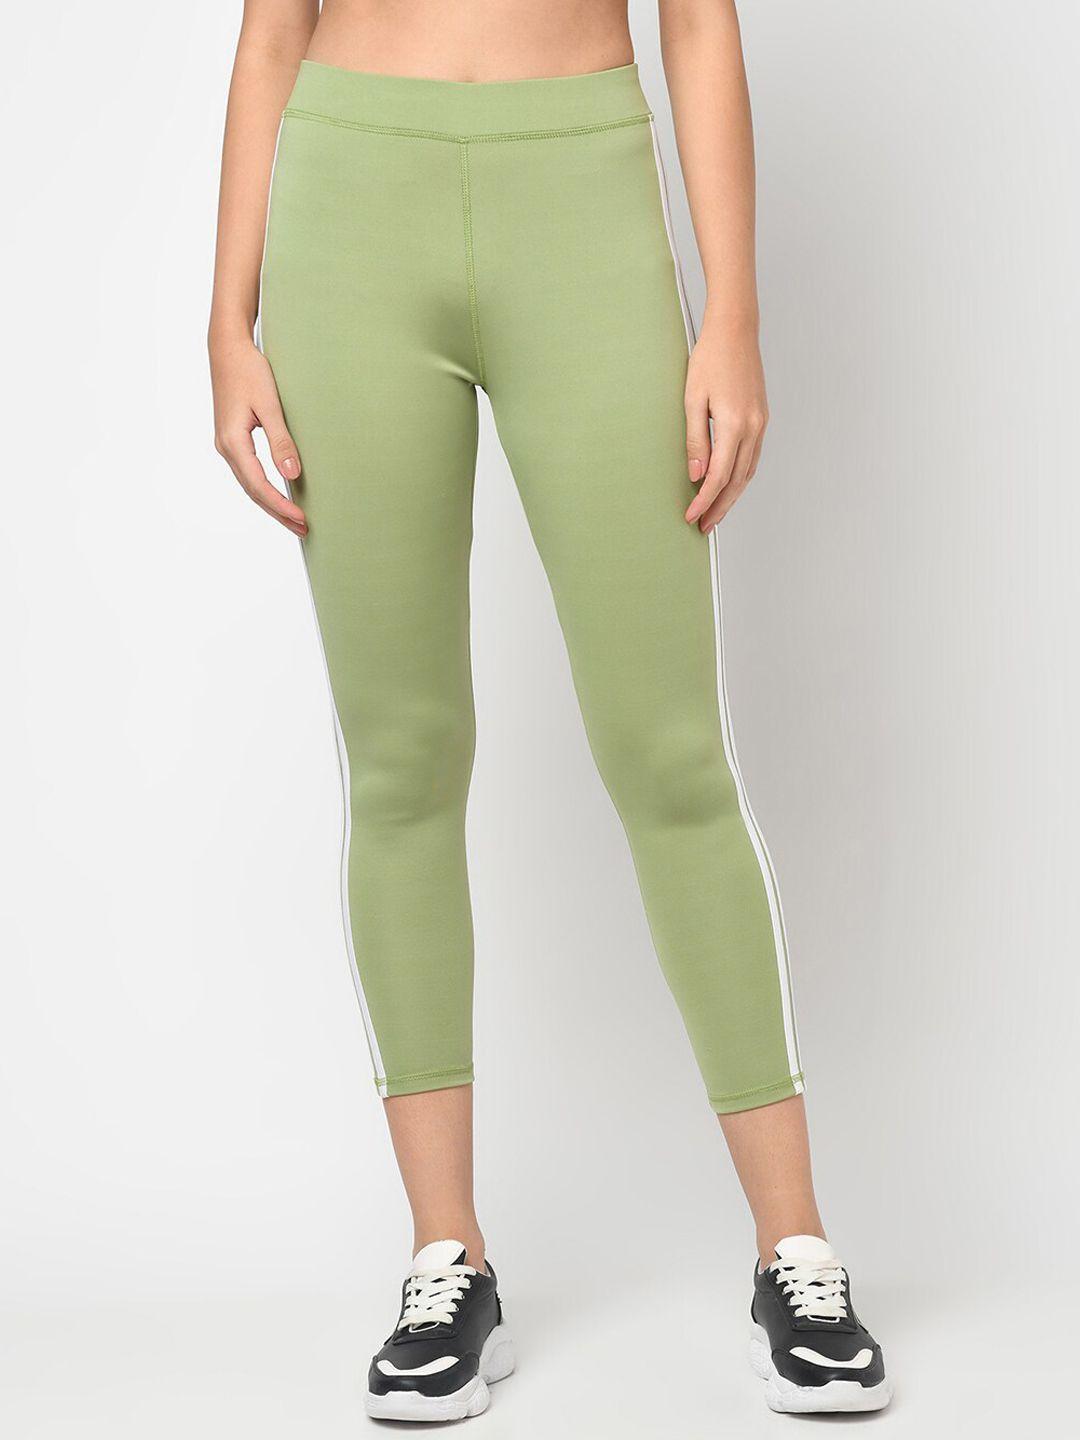 sharktribe women green & white solid tights